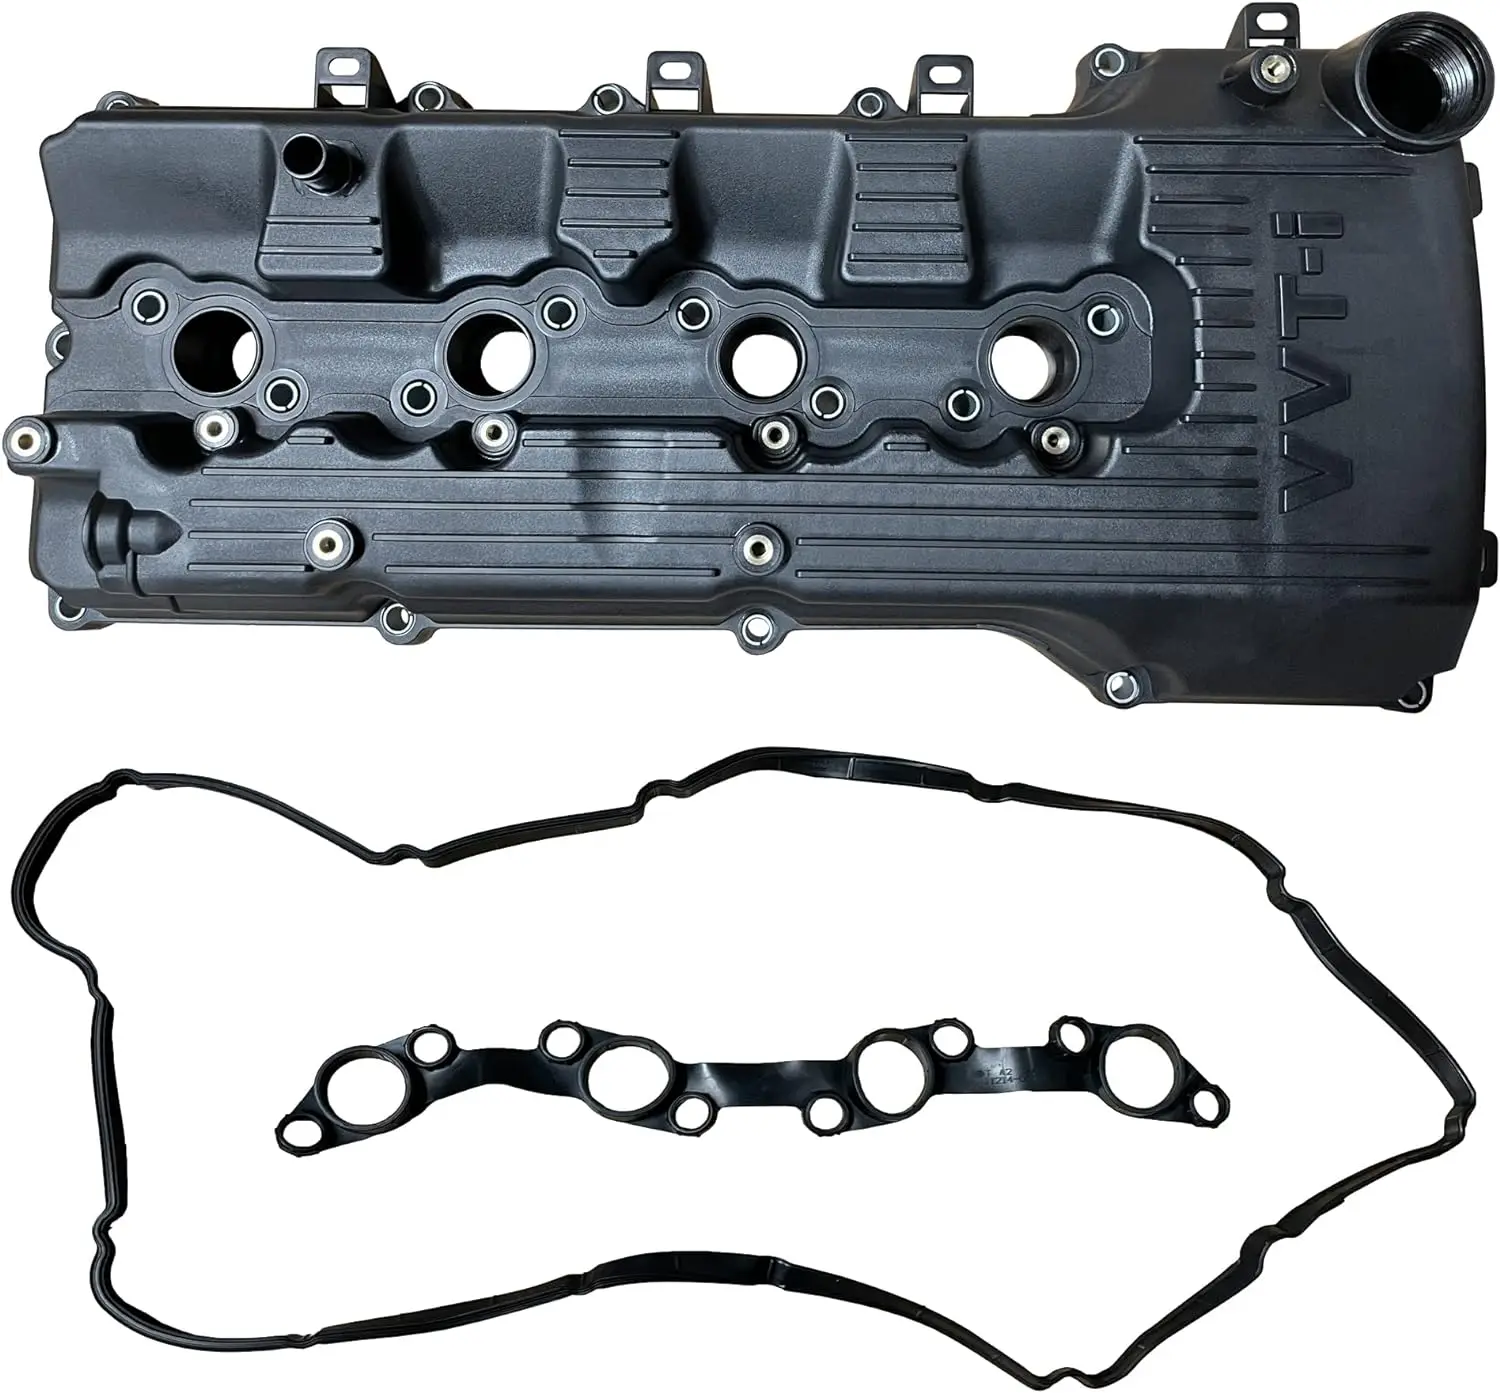 

11201-75055 Engine Valve Cover Cylinder Head for 2005-2015 Toyota Tacoma & 2010 Toyota 4Runner w/Gasket 2.7L